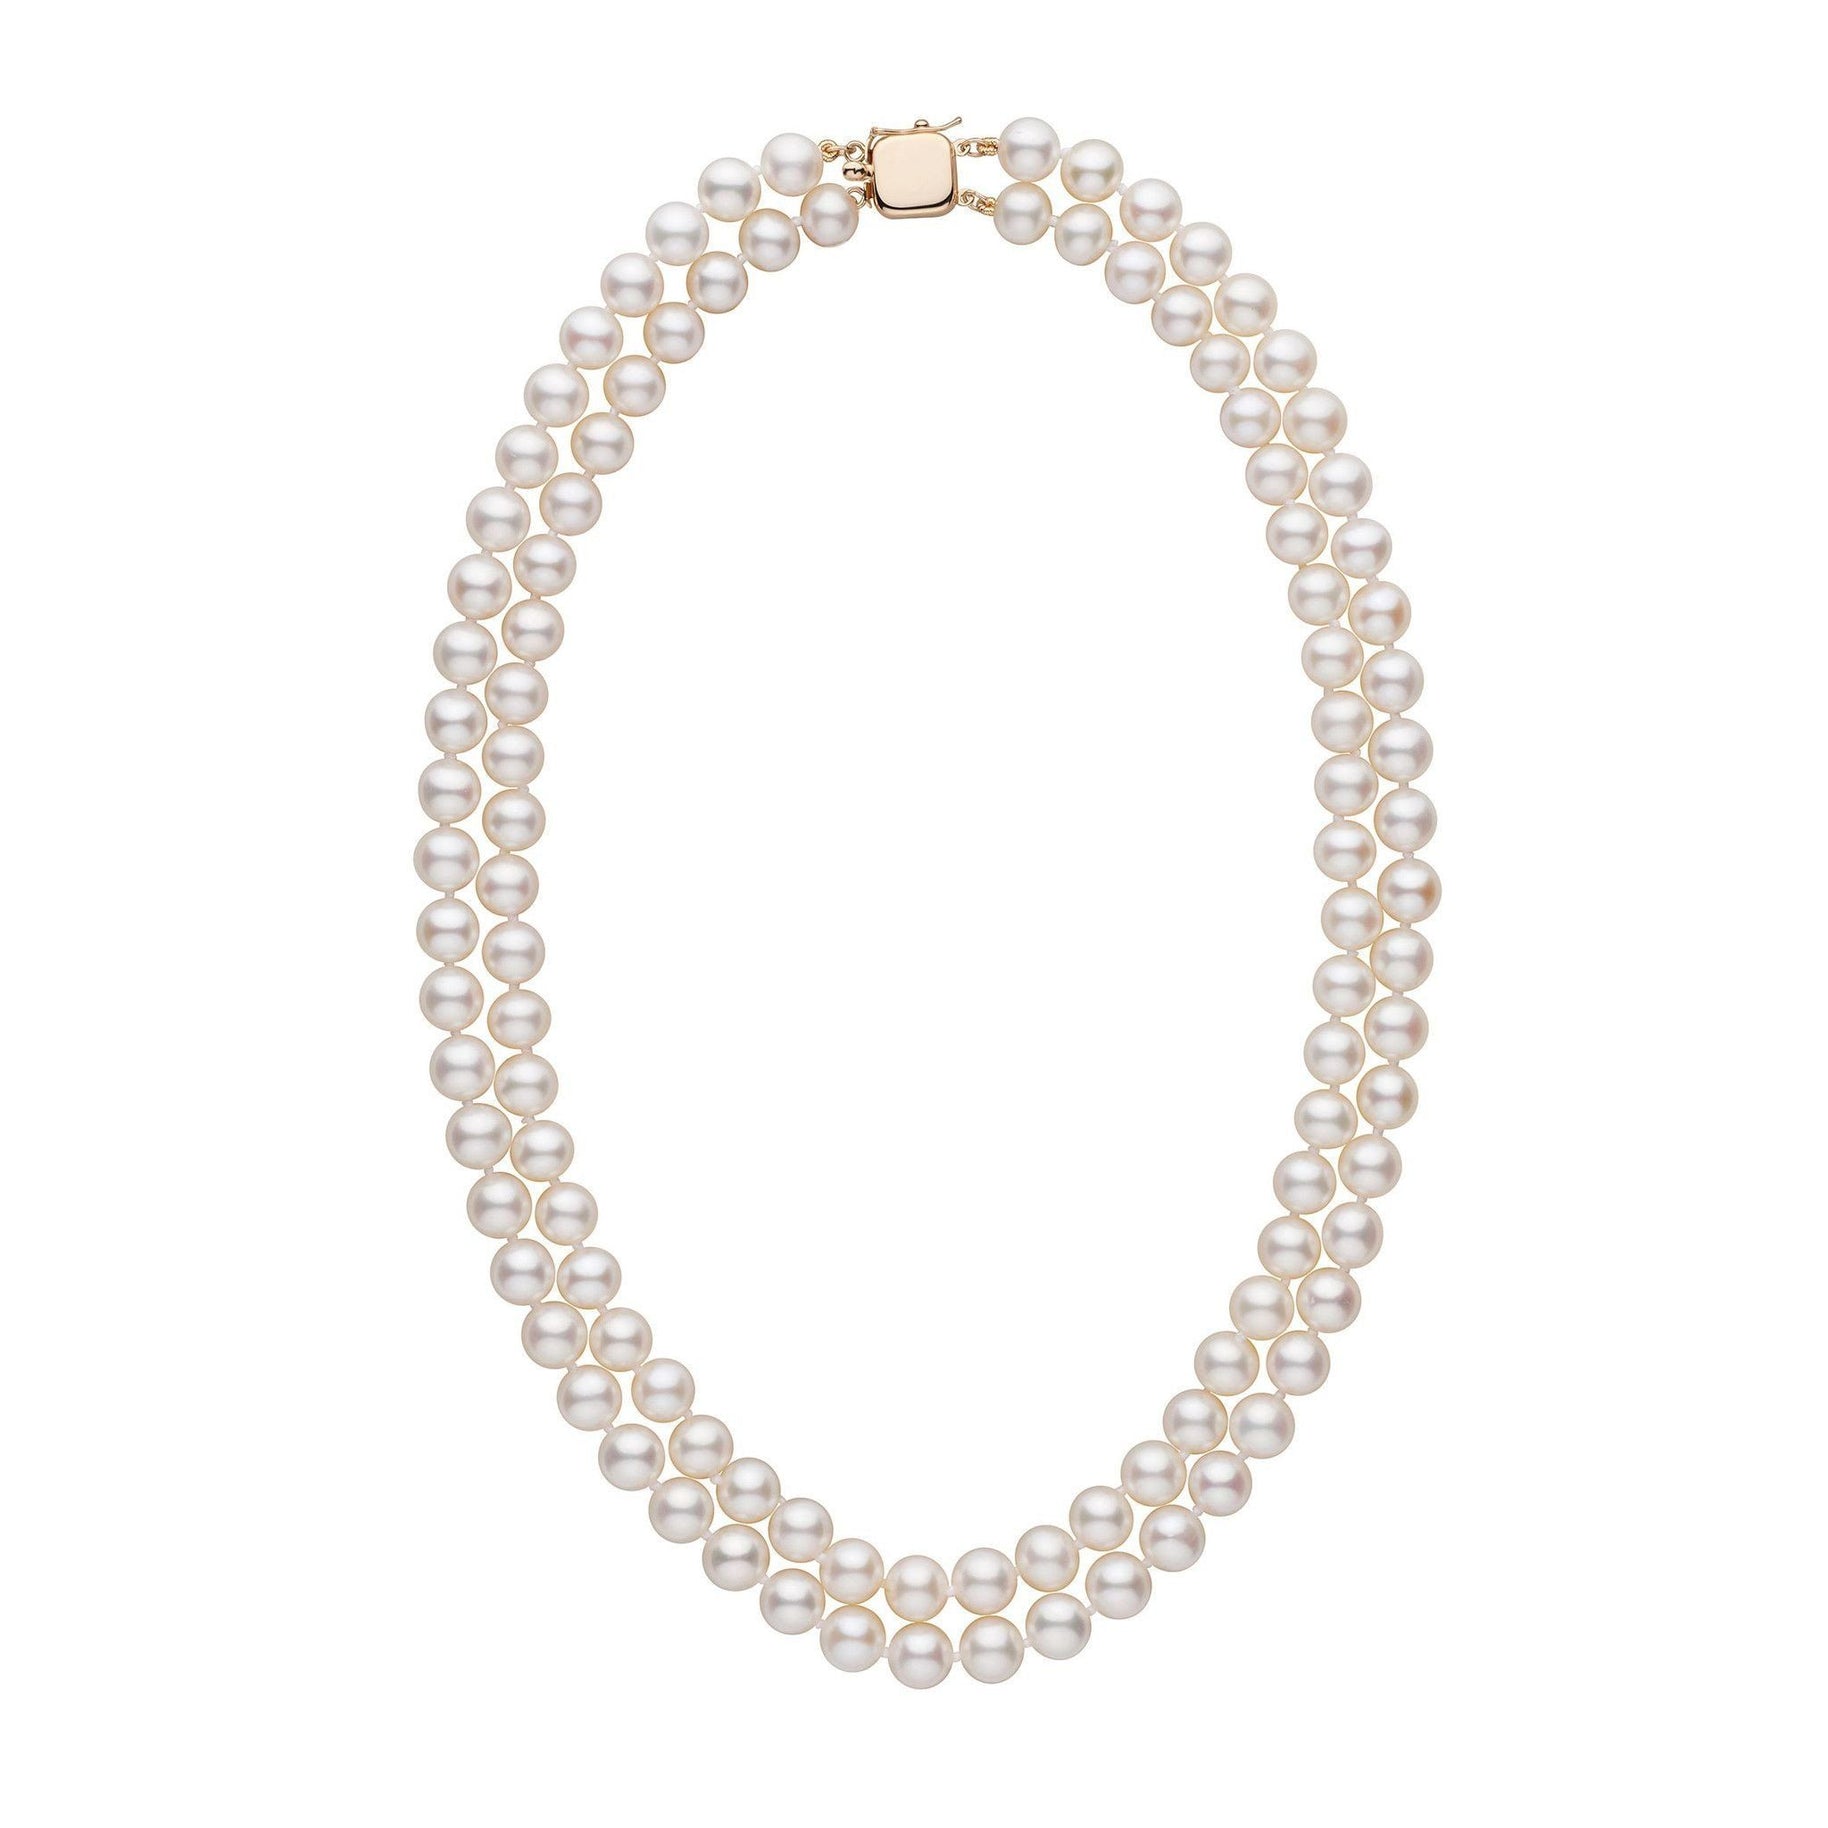 Pearl Necklaces certified and guaranteed - the finest in the world ...